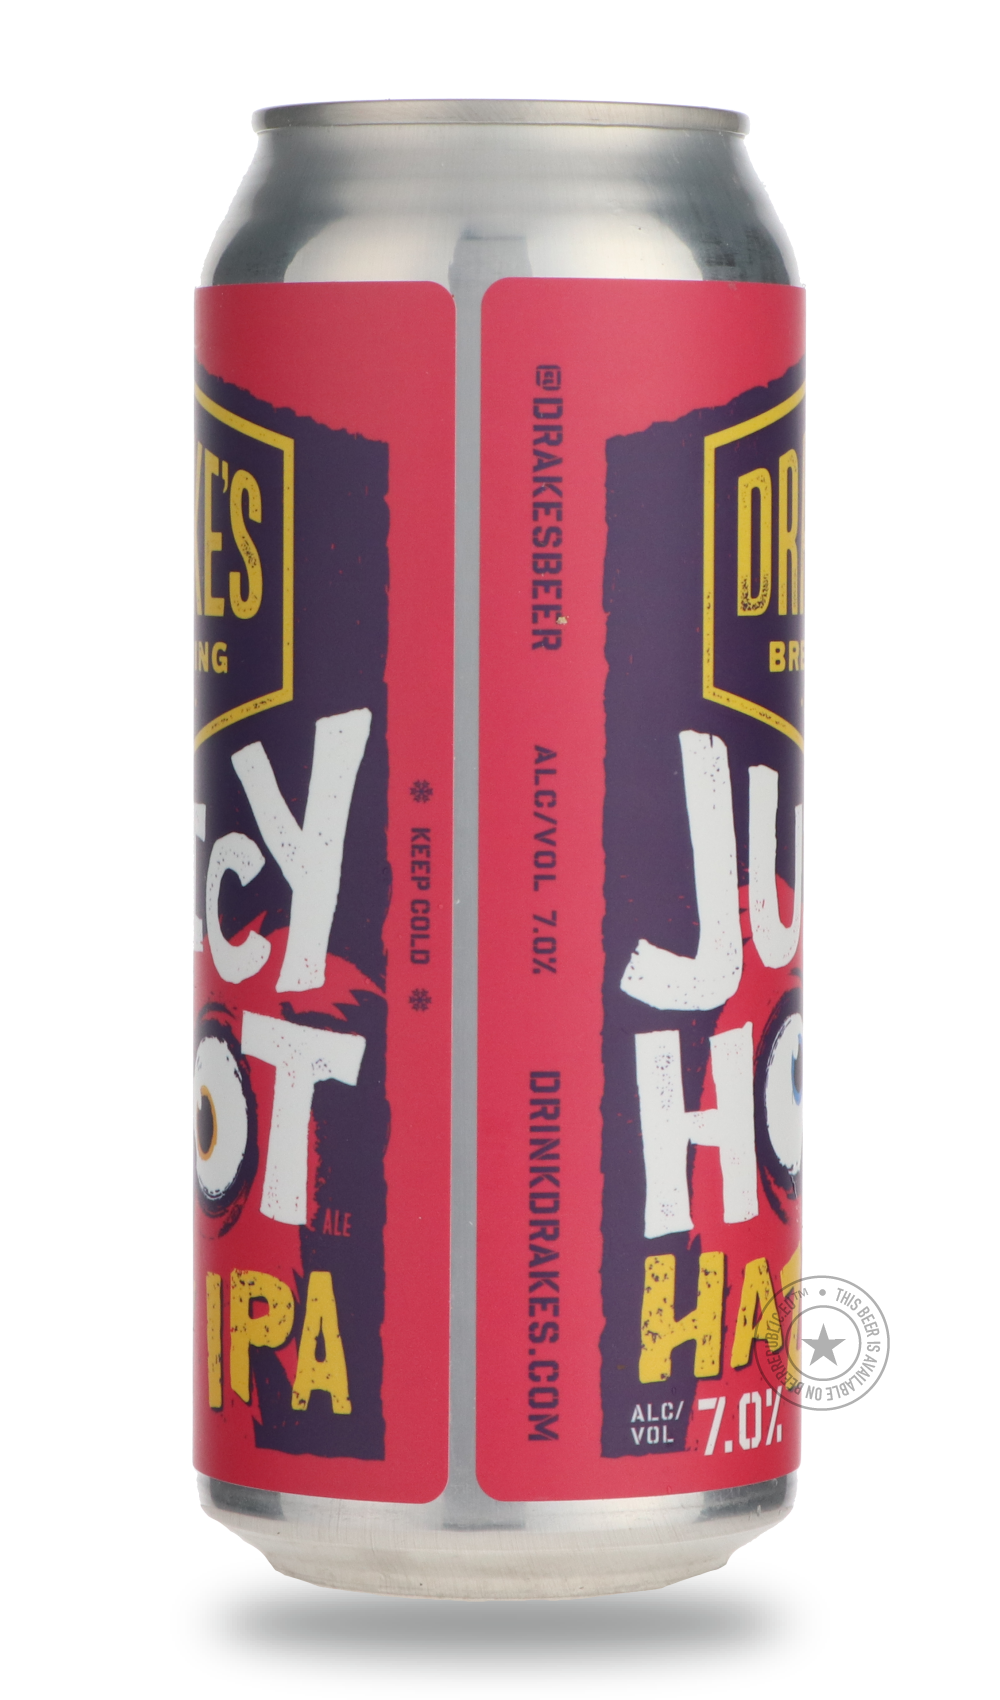 -Drake's- Juicy Hoot-IPA- Only @ Beer Republic - The best online beer store for American & Canadian craft beer - Buy beer online from the USA and Canada - Bier online kopen - Amerikaans bier kopen - Craft beer store - Craft beer kopen - Amerikanisch bier kaufen - Bier online kaufen - Acheter biere online - IPA - Stout - Porter - New England IPA - Hazy IPA - Imperial Stout - Barrel Aged - Barrel Aged Imperial Stout - Brown - Dark beer - Blond - Blonde - Pilsner - Lager - Wheat - Weizen - Amber - Barley Wine 